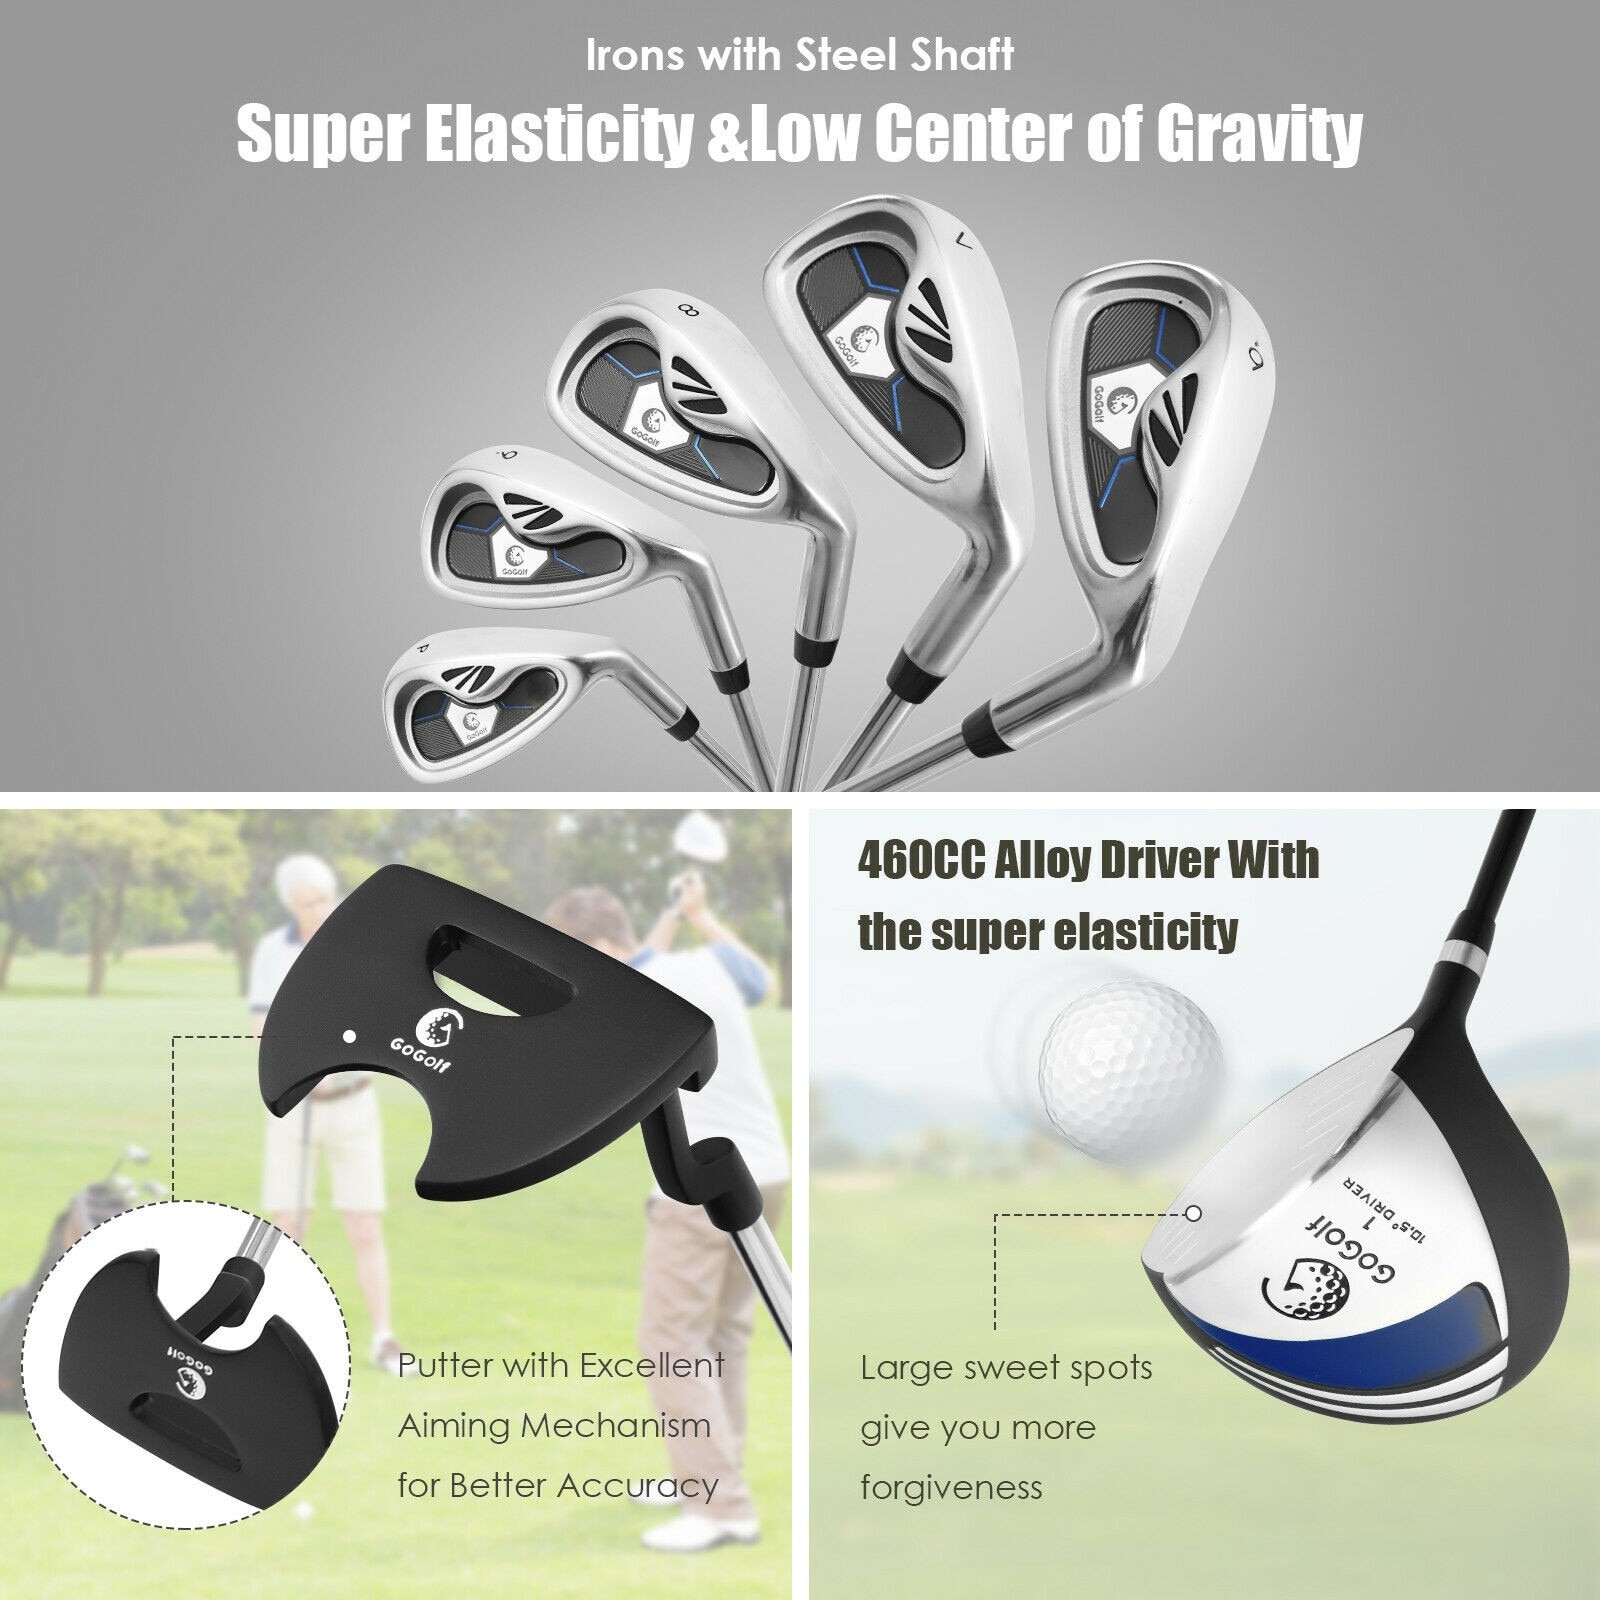 10 Pcs mens Complete Golf Club Set with Alloy Driver golf clubs iron set Womens Ladies Female Girls Half Golf Clubs